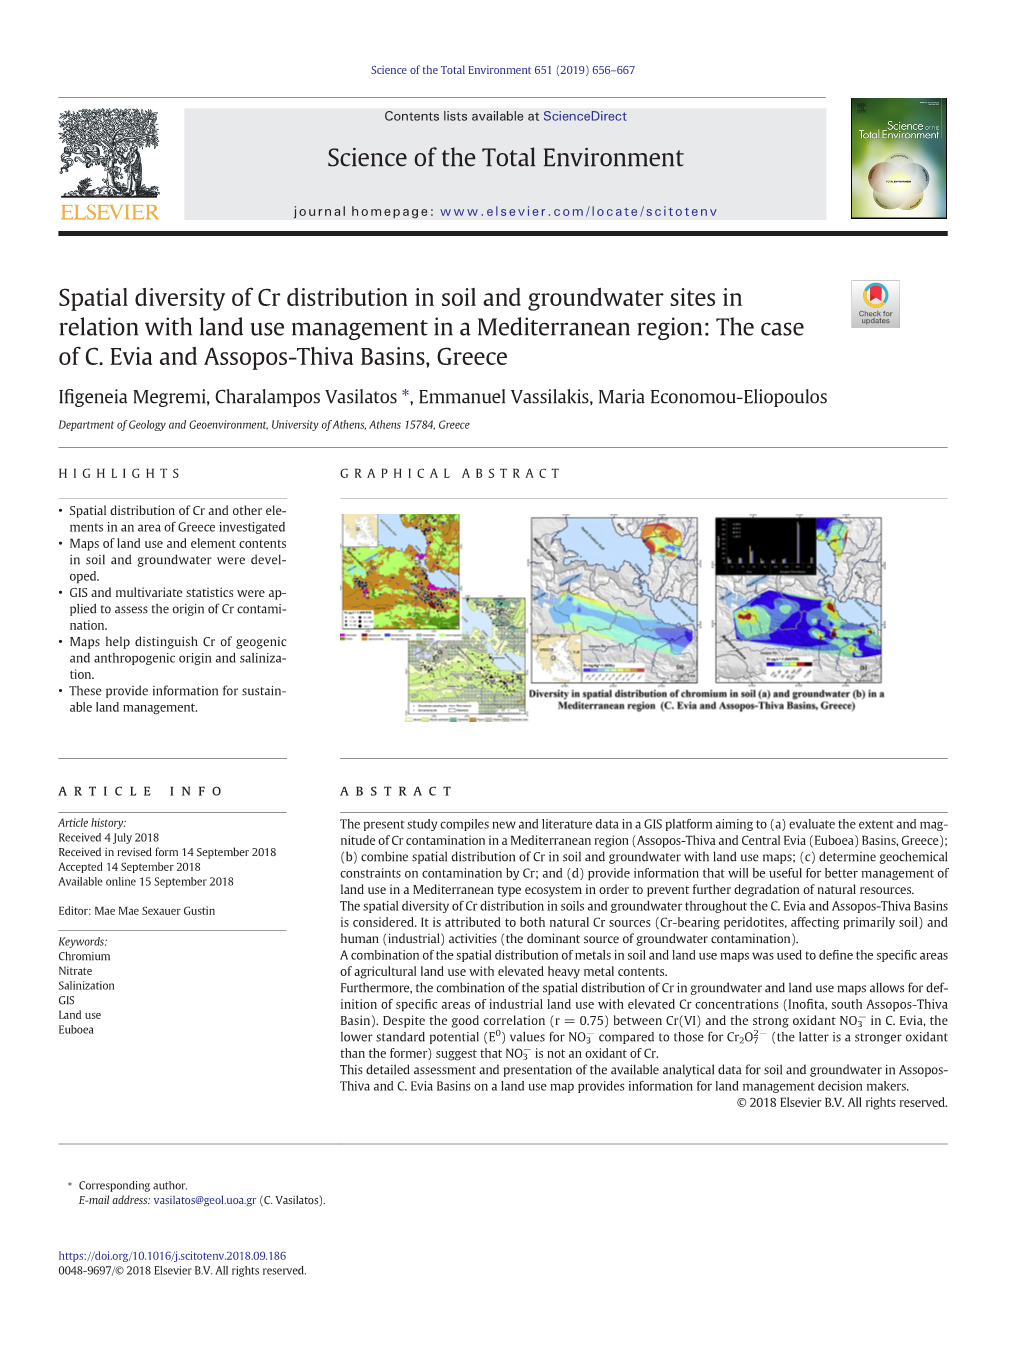 Spatial Diversity of Cr Distribution in Soil and Groundwater Sites in Relation with Land Use Management in a Mediterranean Region: the Case of C